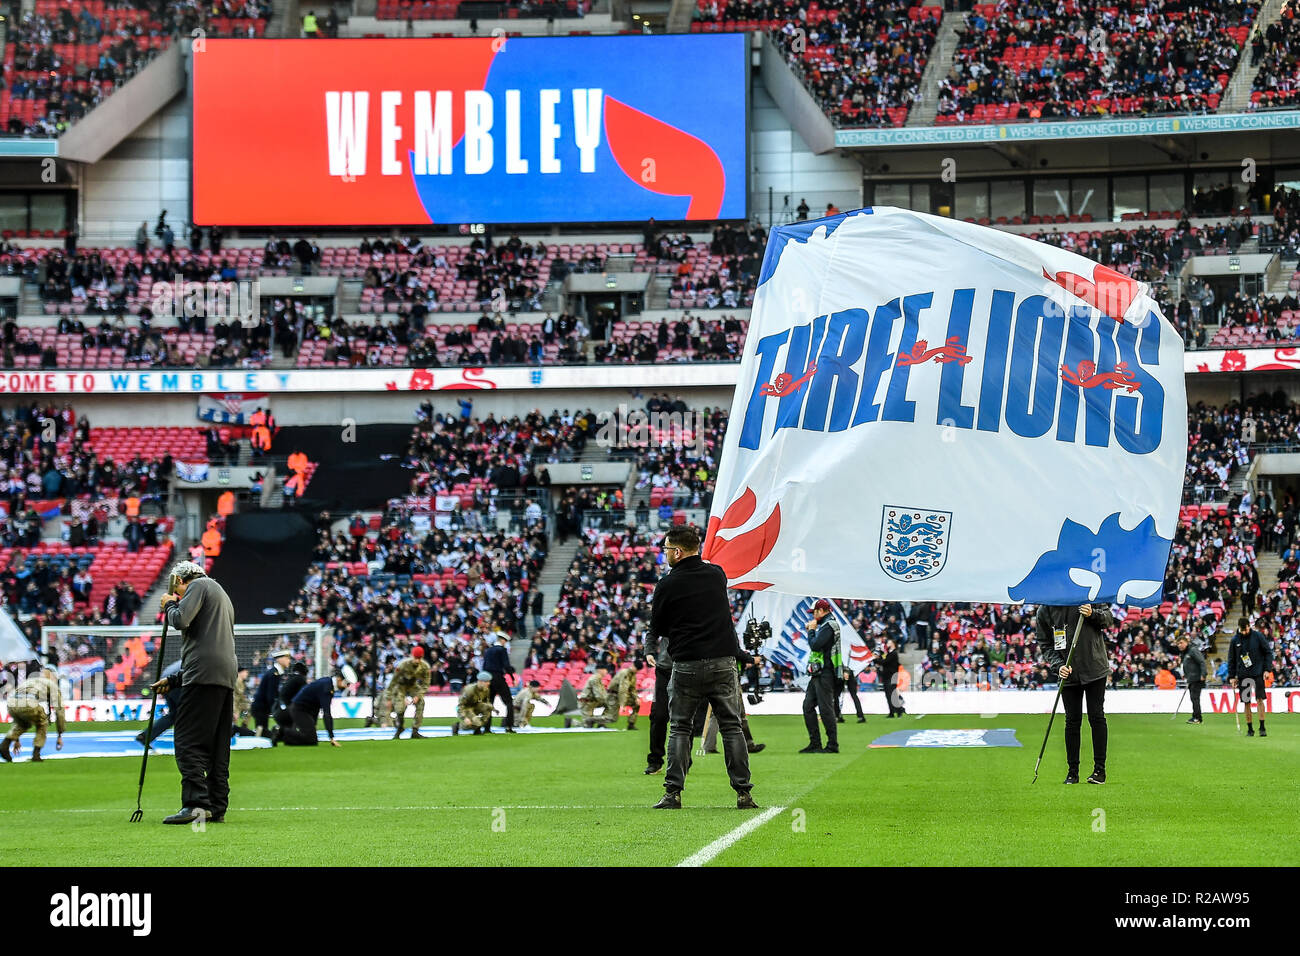 London, UK. 18th November 2018. Three Lions flag being waved during the UEFA Nations League match between England and Croatia at Wembley Stadium, London on Sunday 18th November 2018. (©MI News & Sport Ltd | Alamy Live News) Stock Photo